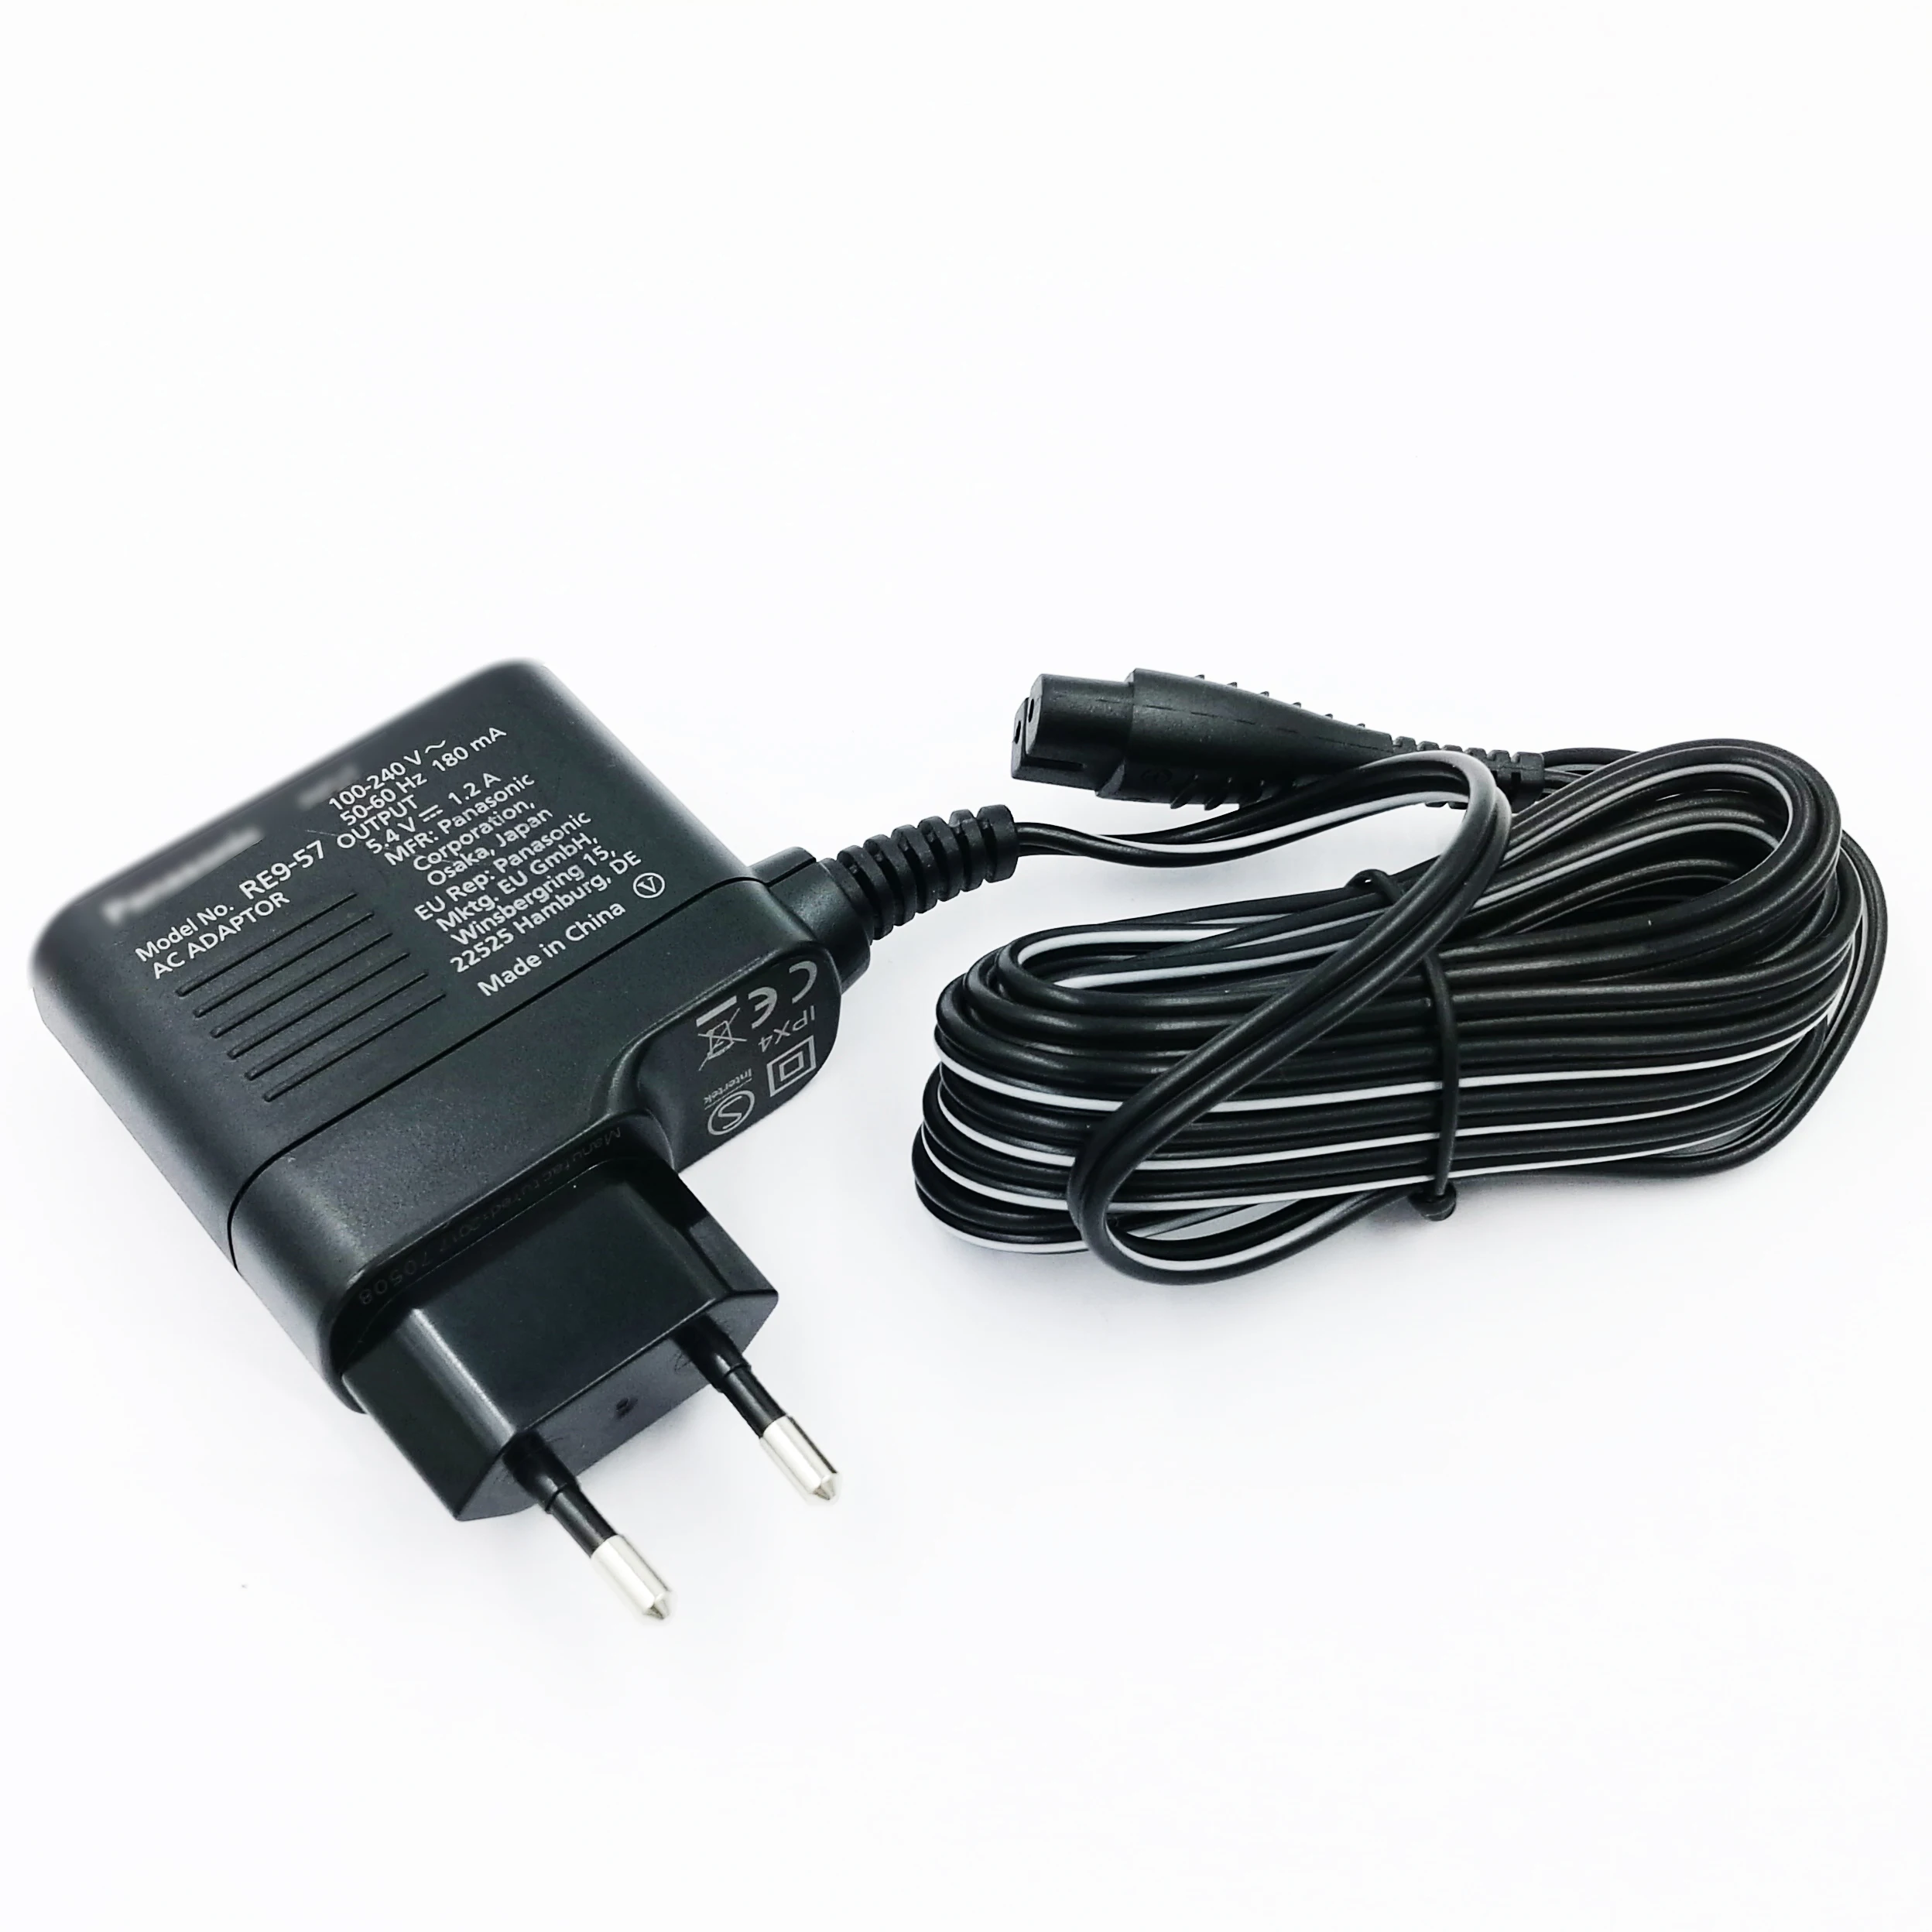 panasonic trimmer charger price